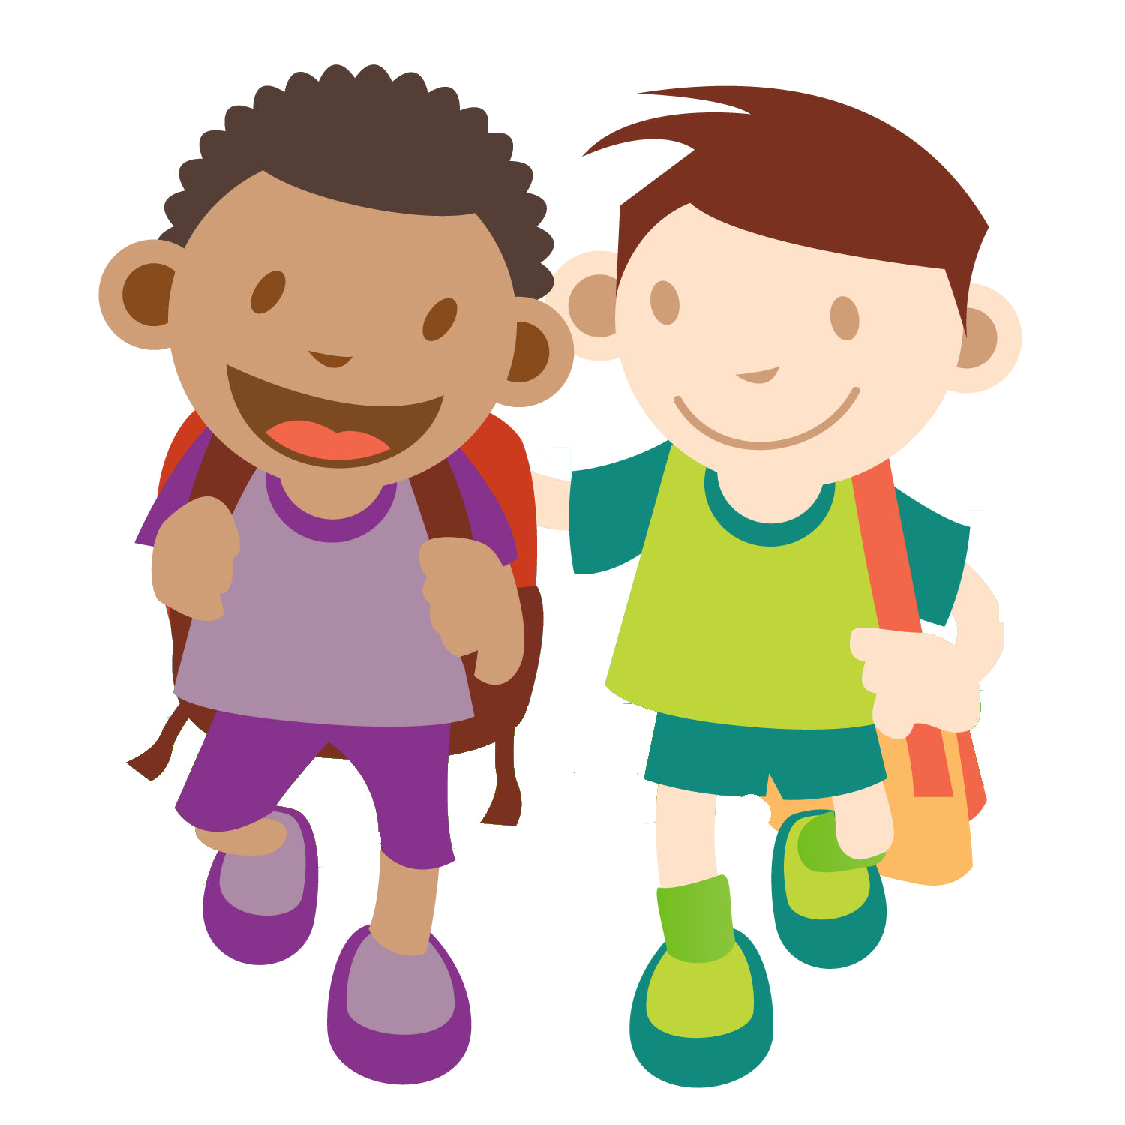 Free two cartoon boys. Legs clipart foot stomping